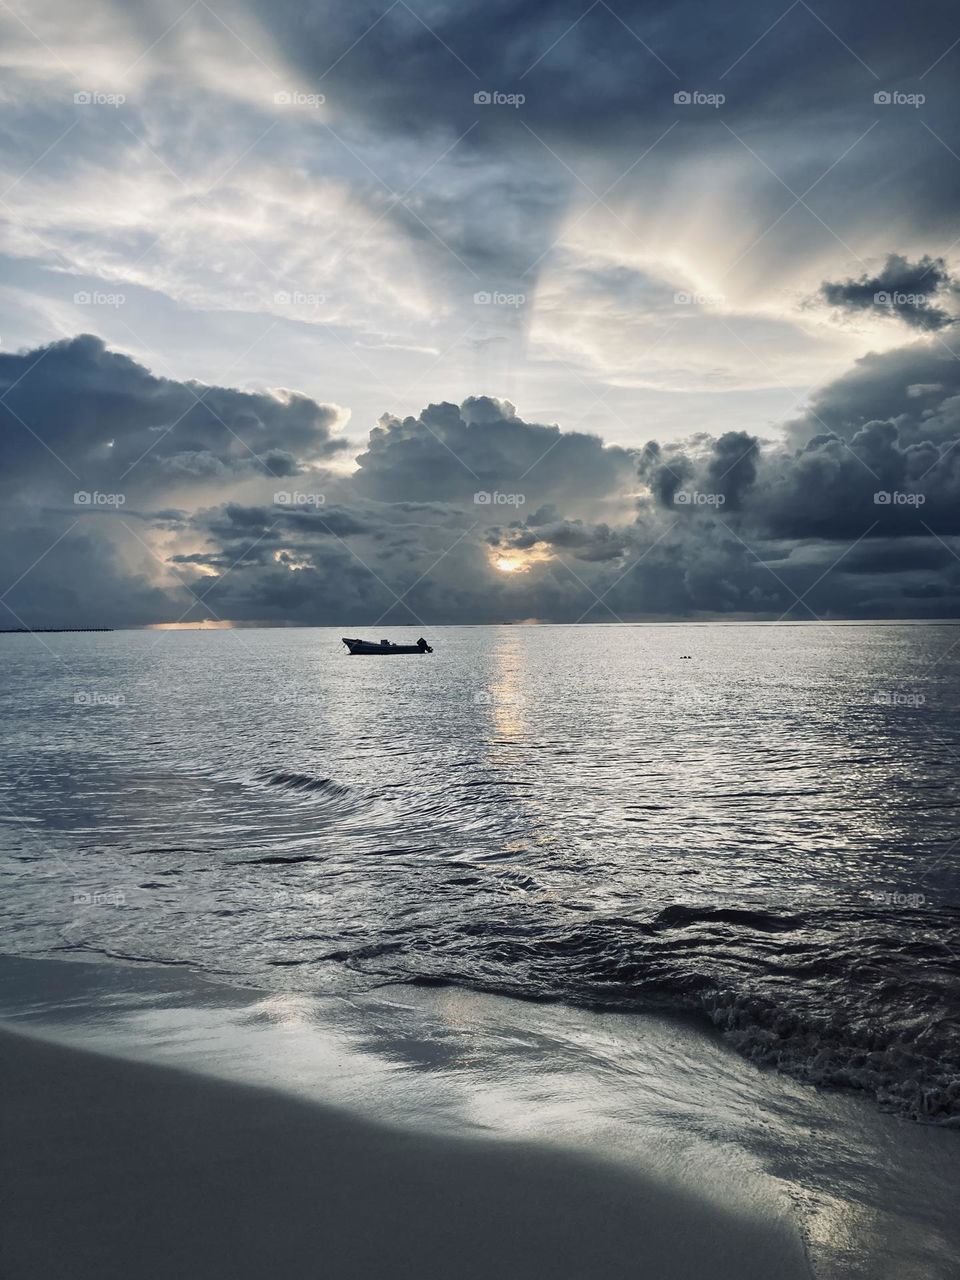 mysterious deep ocean during sunrise in méxico, rain season, storm clouds are on the sky, sun is peaking throughout them, boat is being slowly moved by waves 